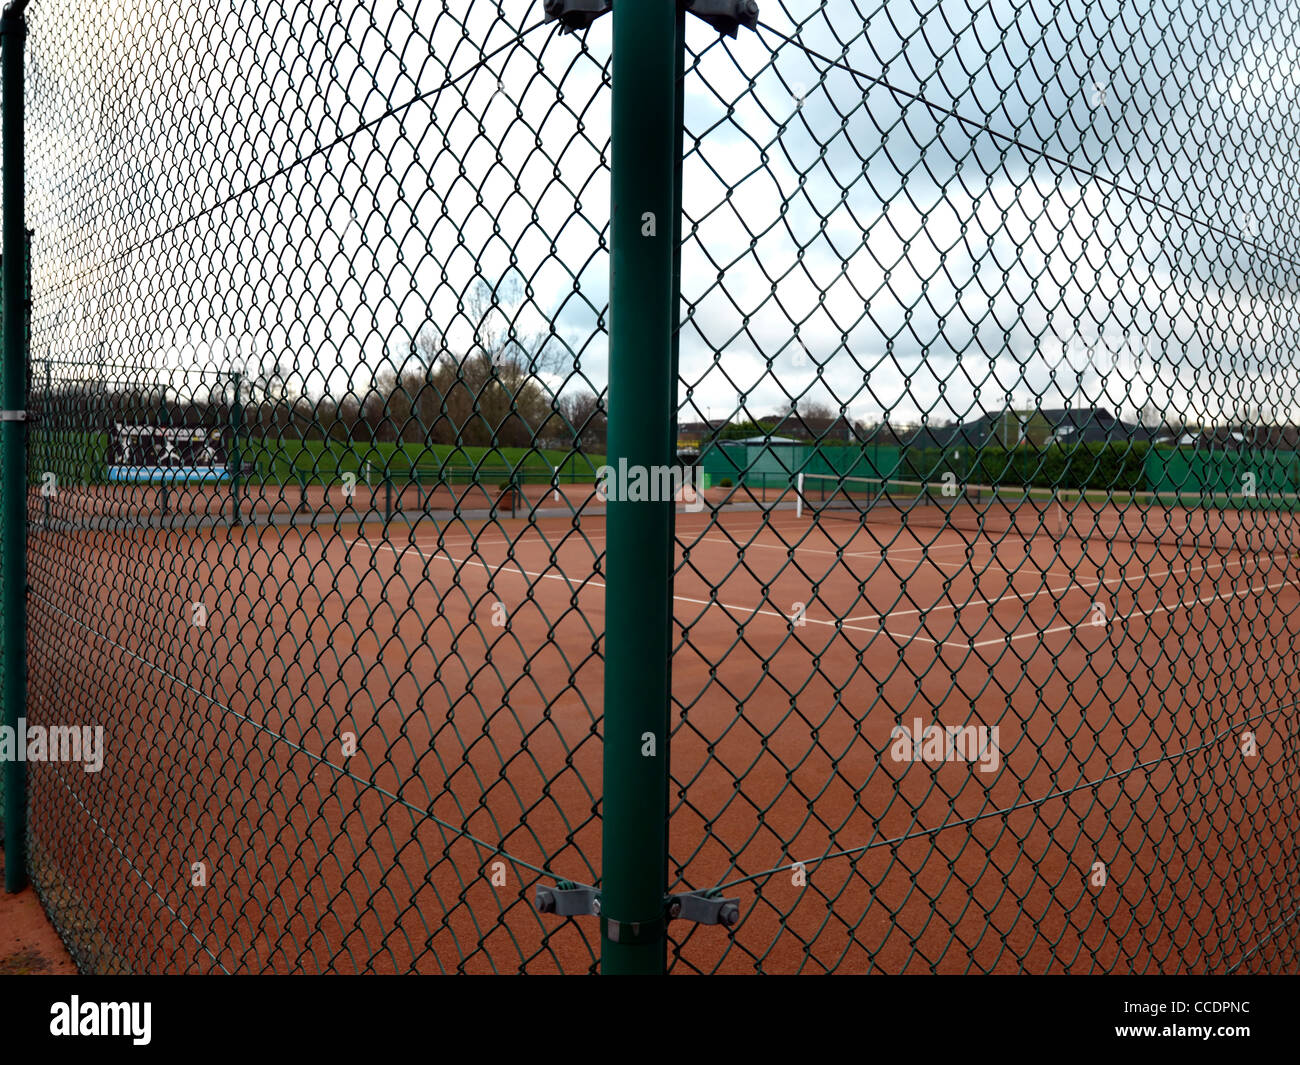 Wire Mesh Fencing Around Tennis Courts Stock Photo